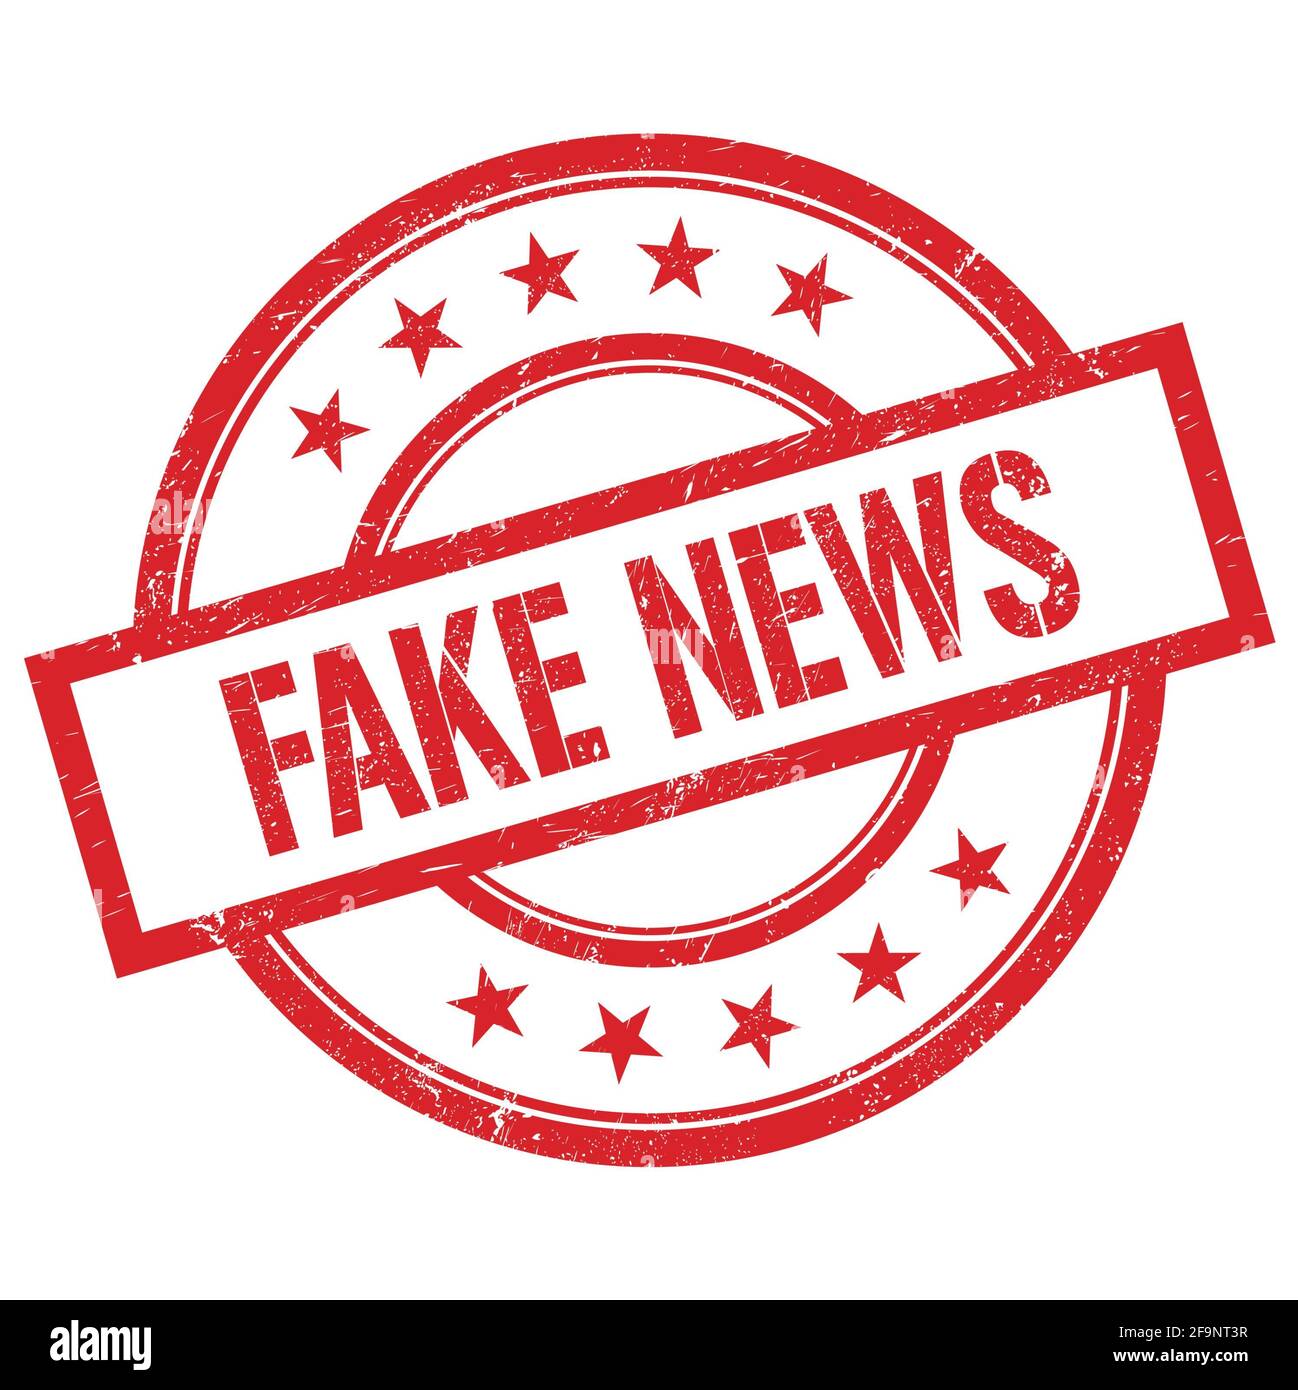 Fake News Rubber Stamp High Resolution Stock Photography and Images - Alamy